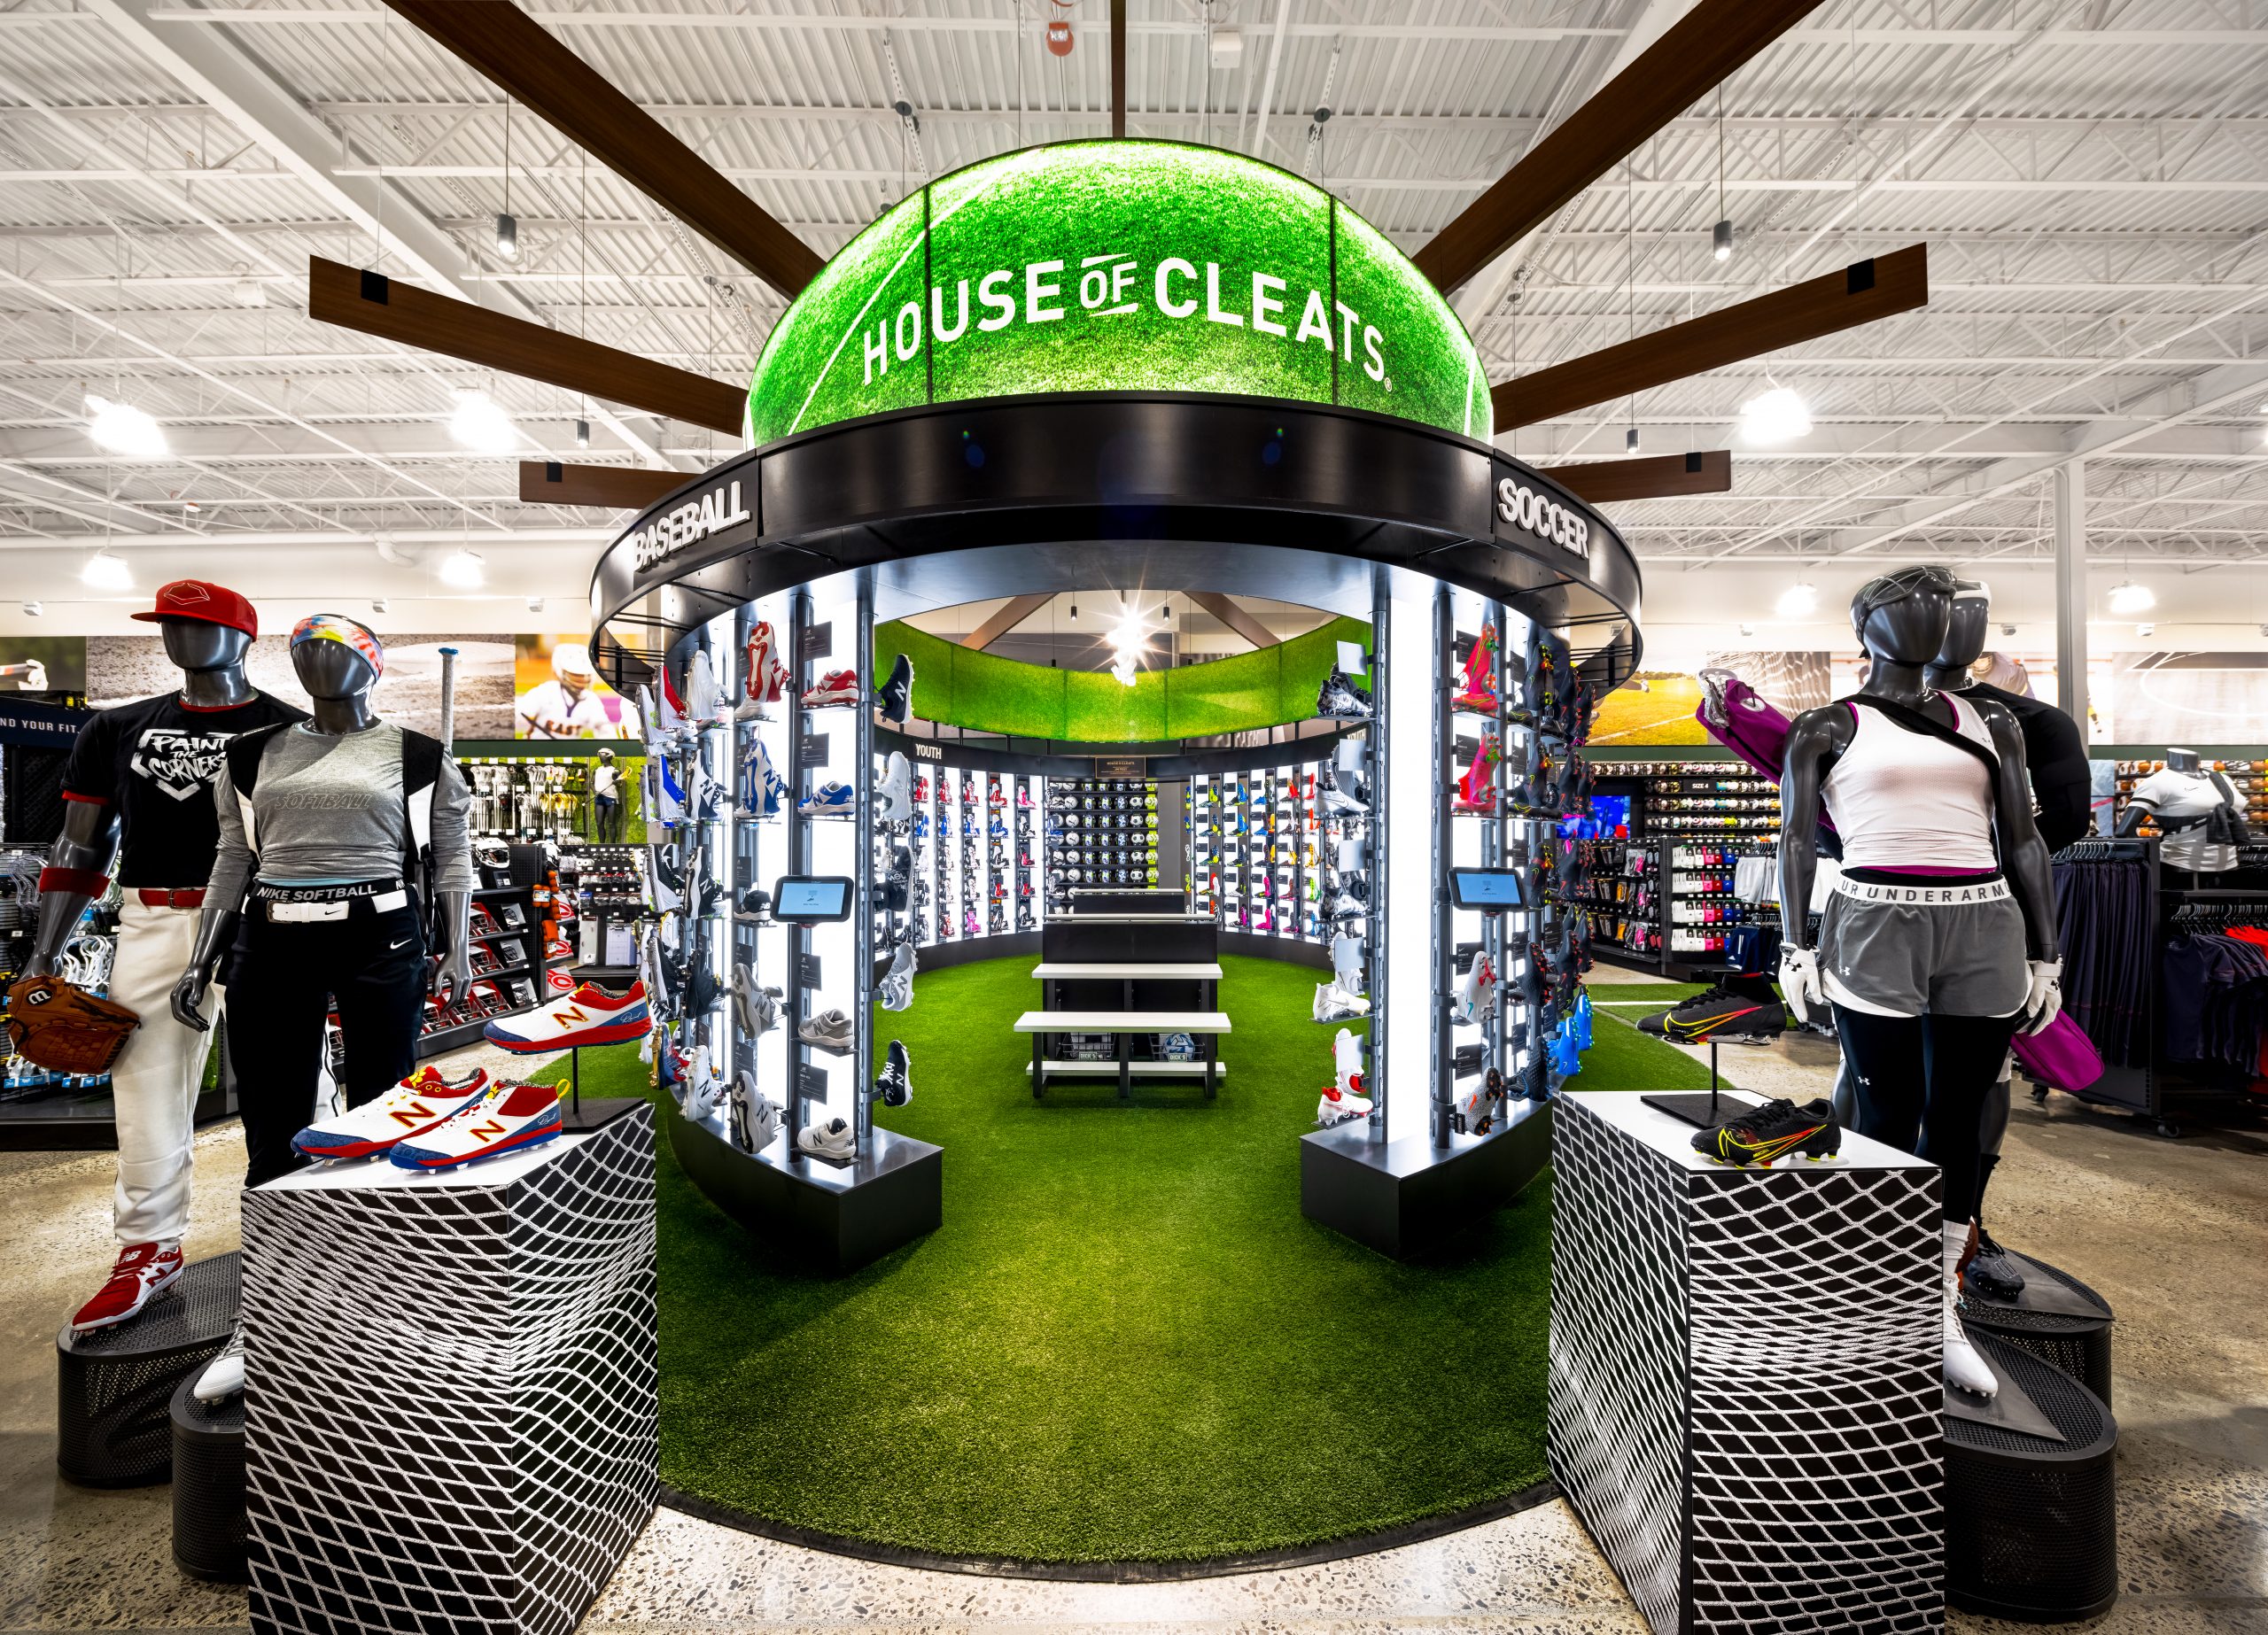 Dick's Sporting Goods Knocks It Out of the Park with “House of Sport”  Experiential Concept – Visual Merchandising and Store Design